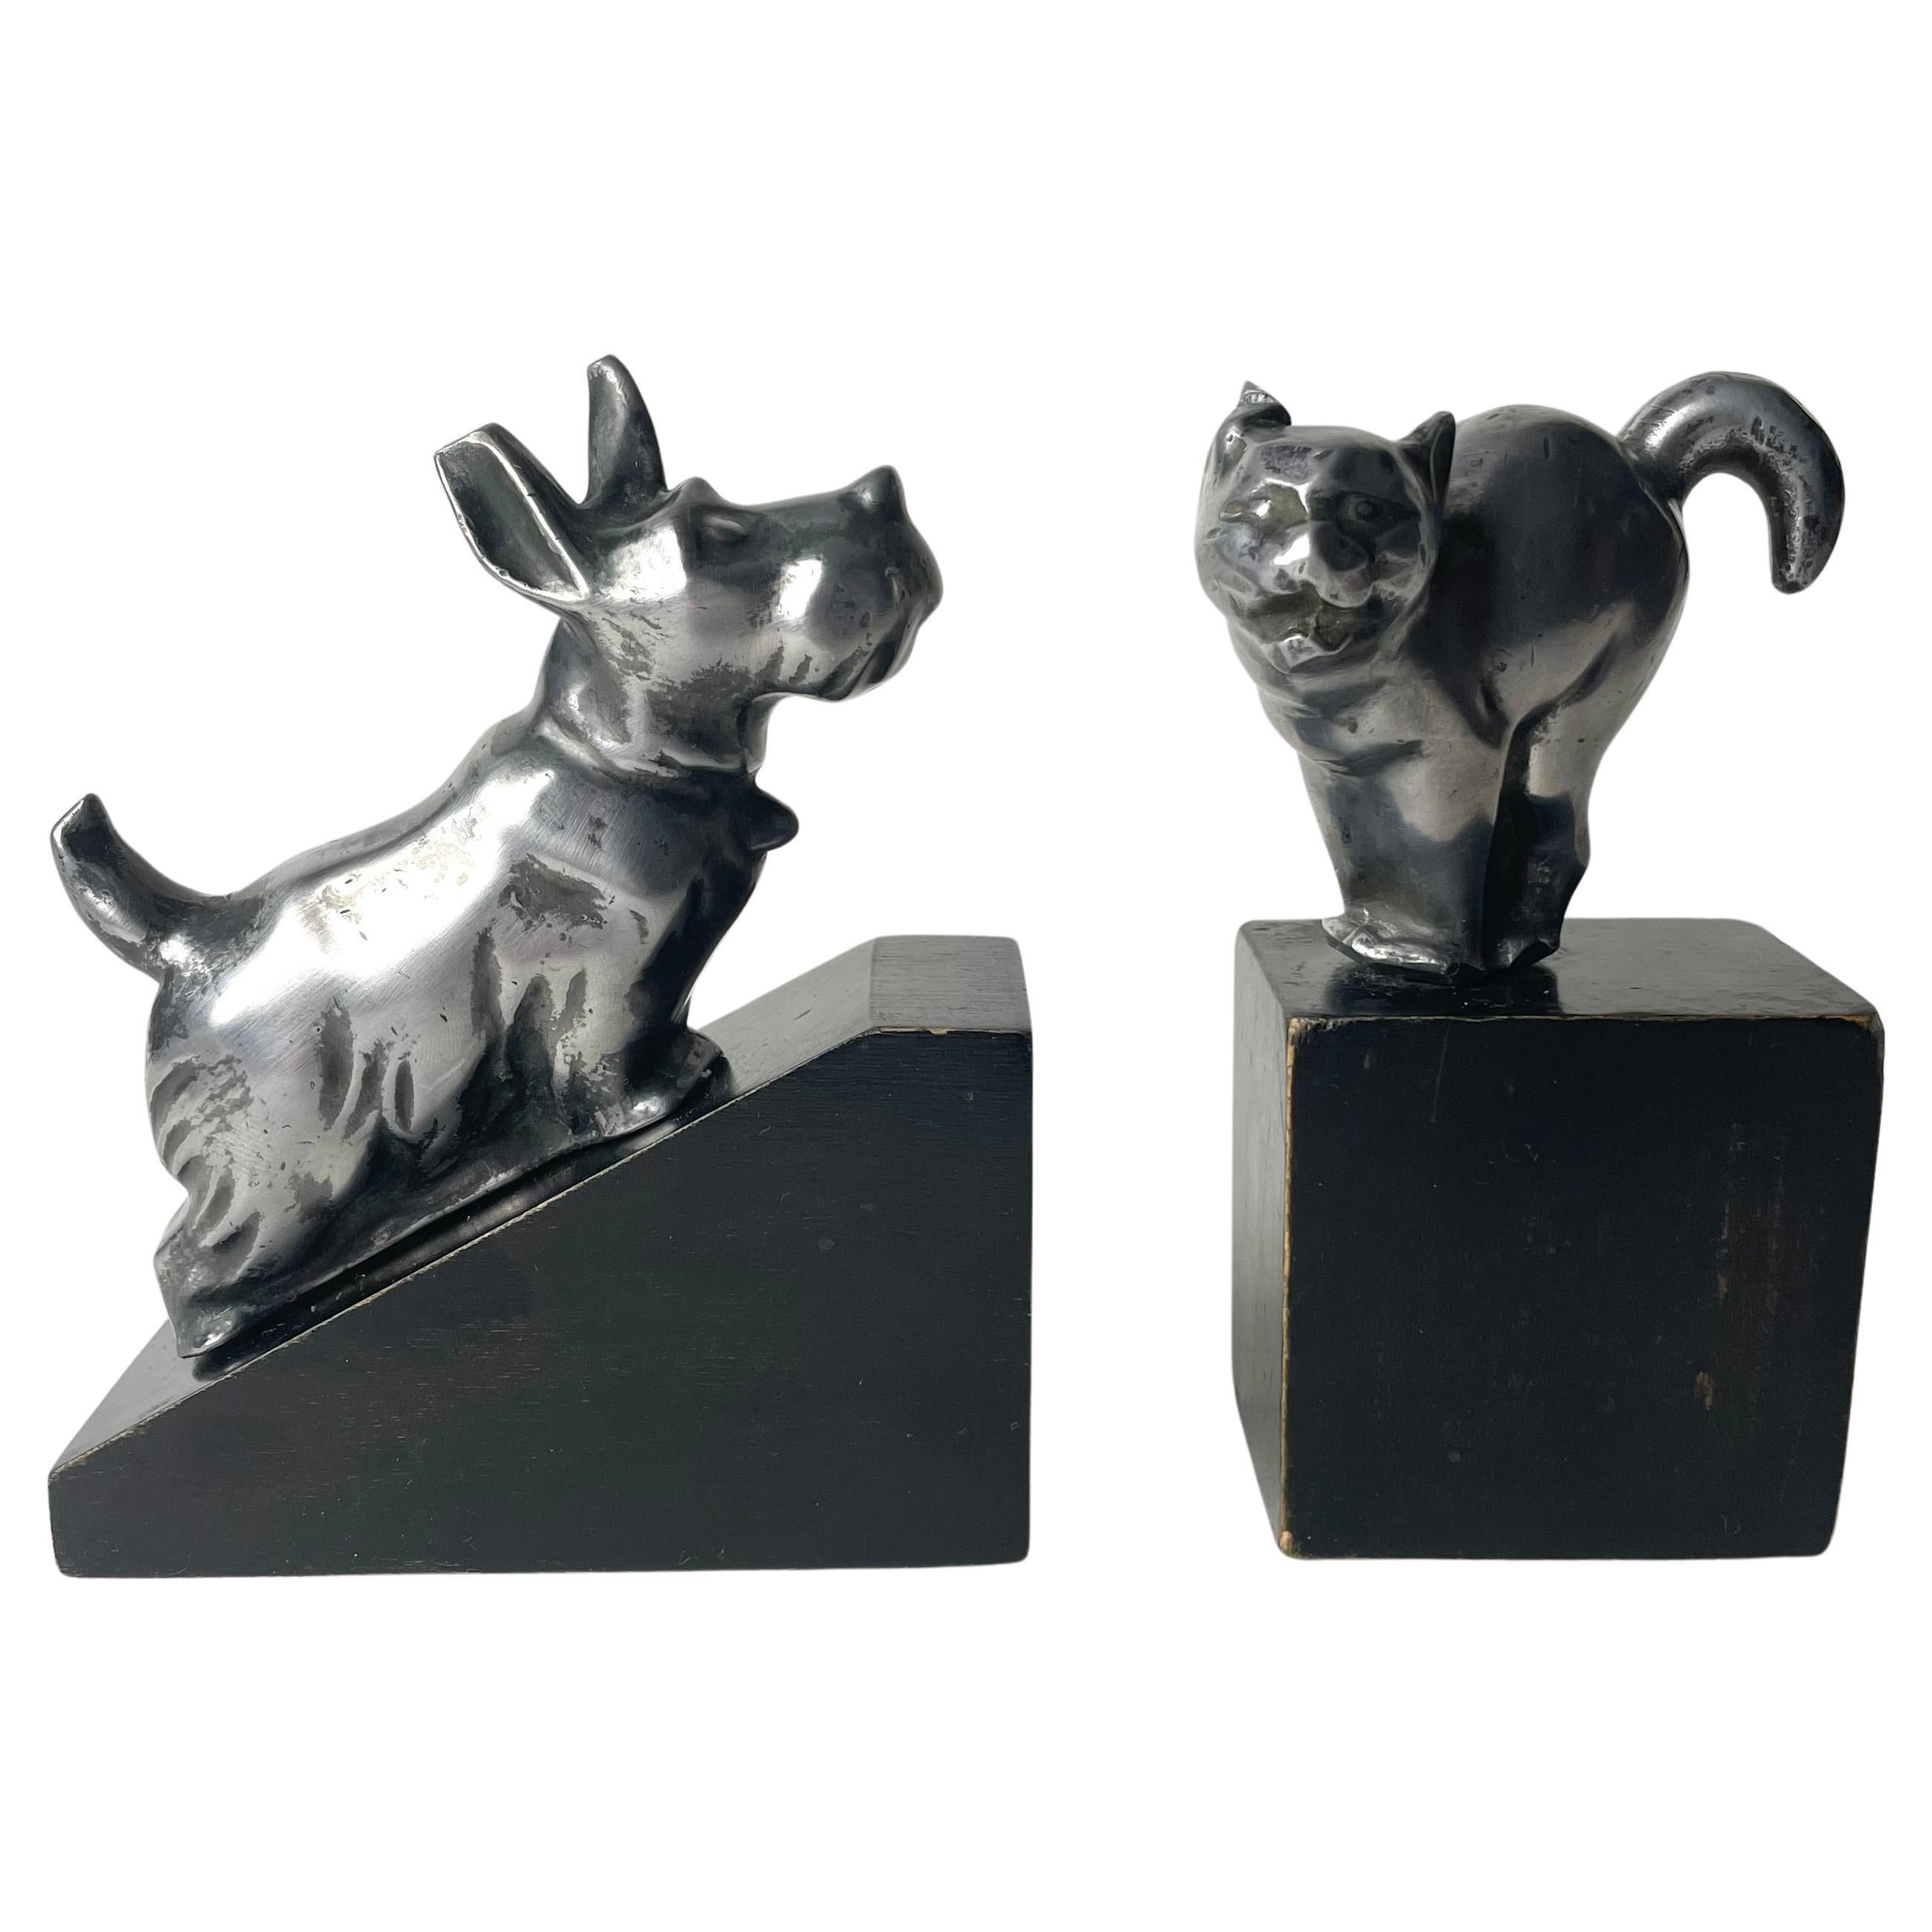 A charming pair of Art Deco Bookends with a dog and a cat from the 1920s-1930s